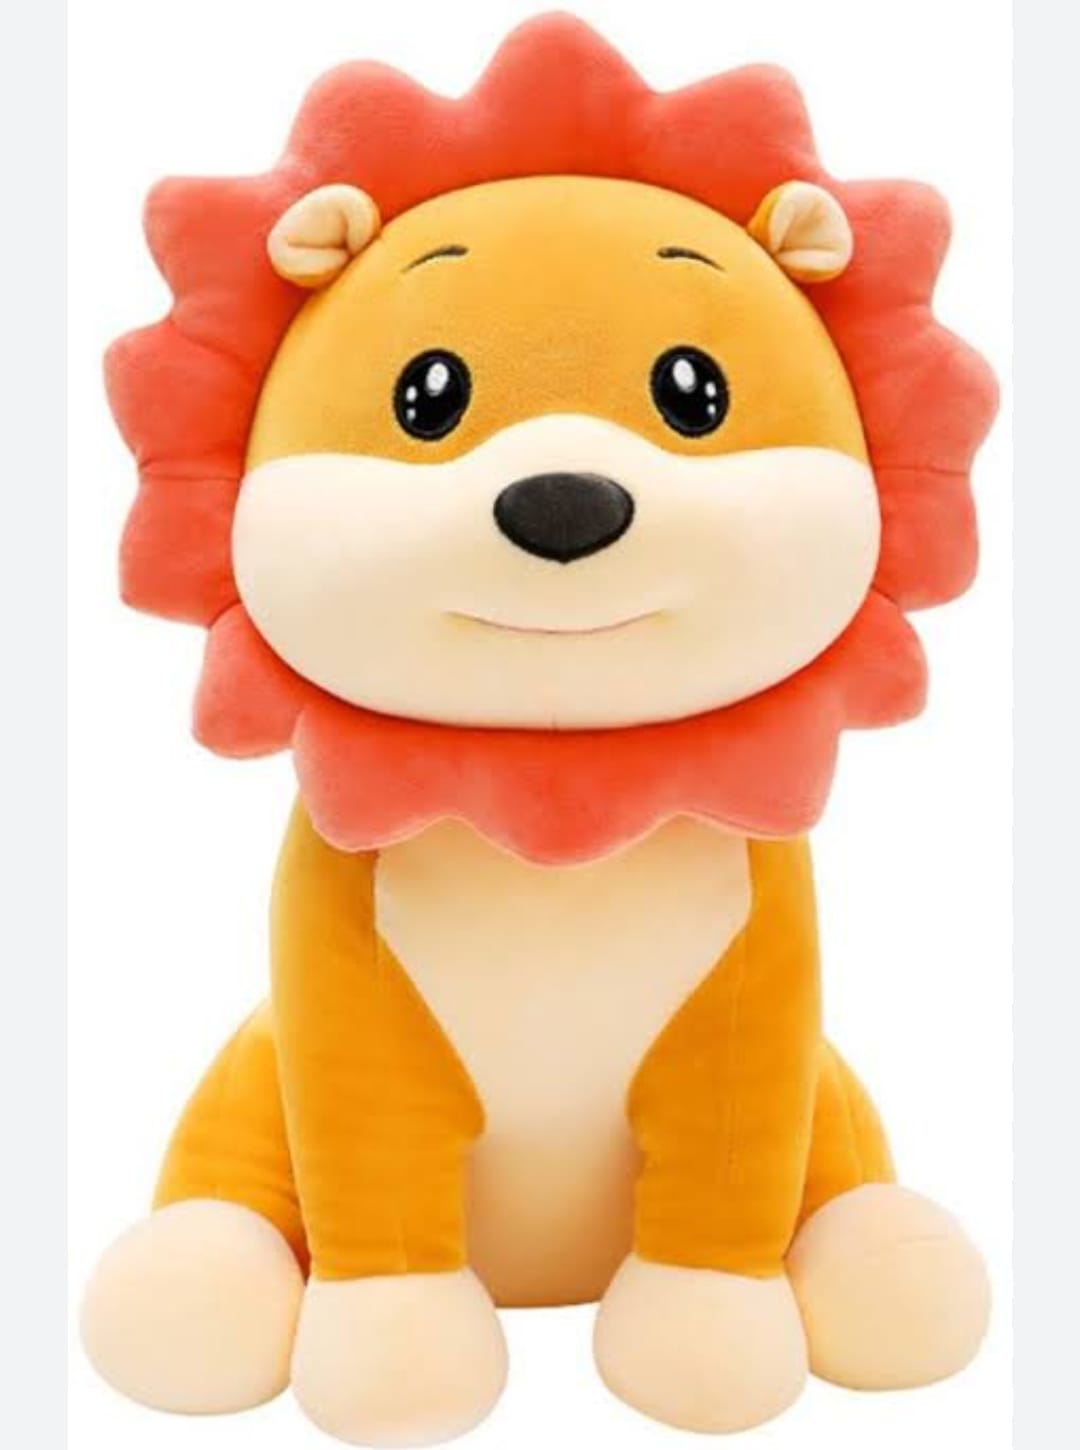 "Simba Lion Plush - Bring Home the Magic of the Pride Lands!"